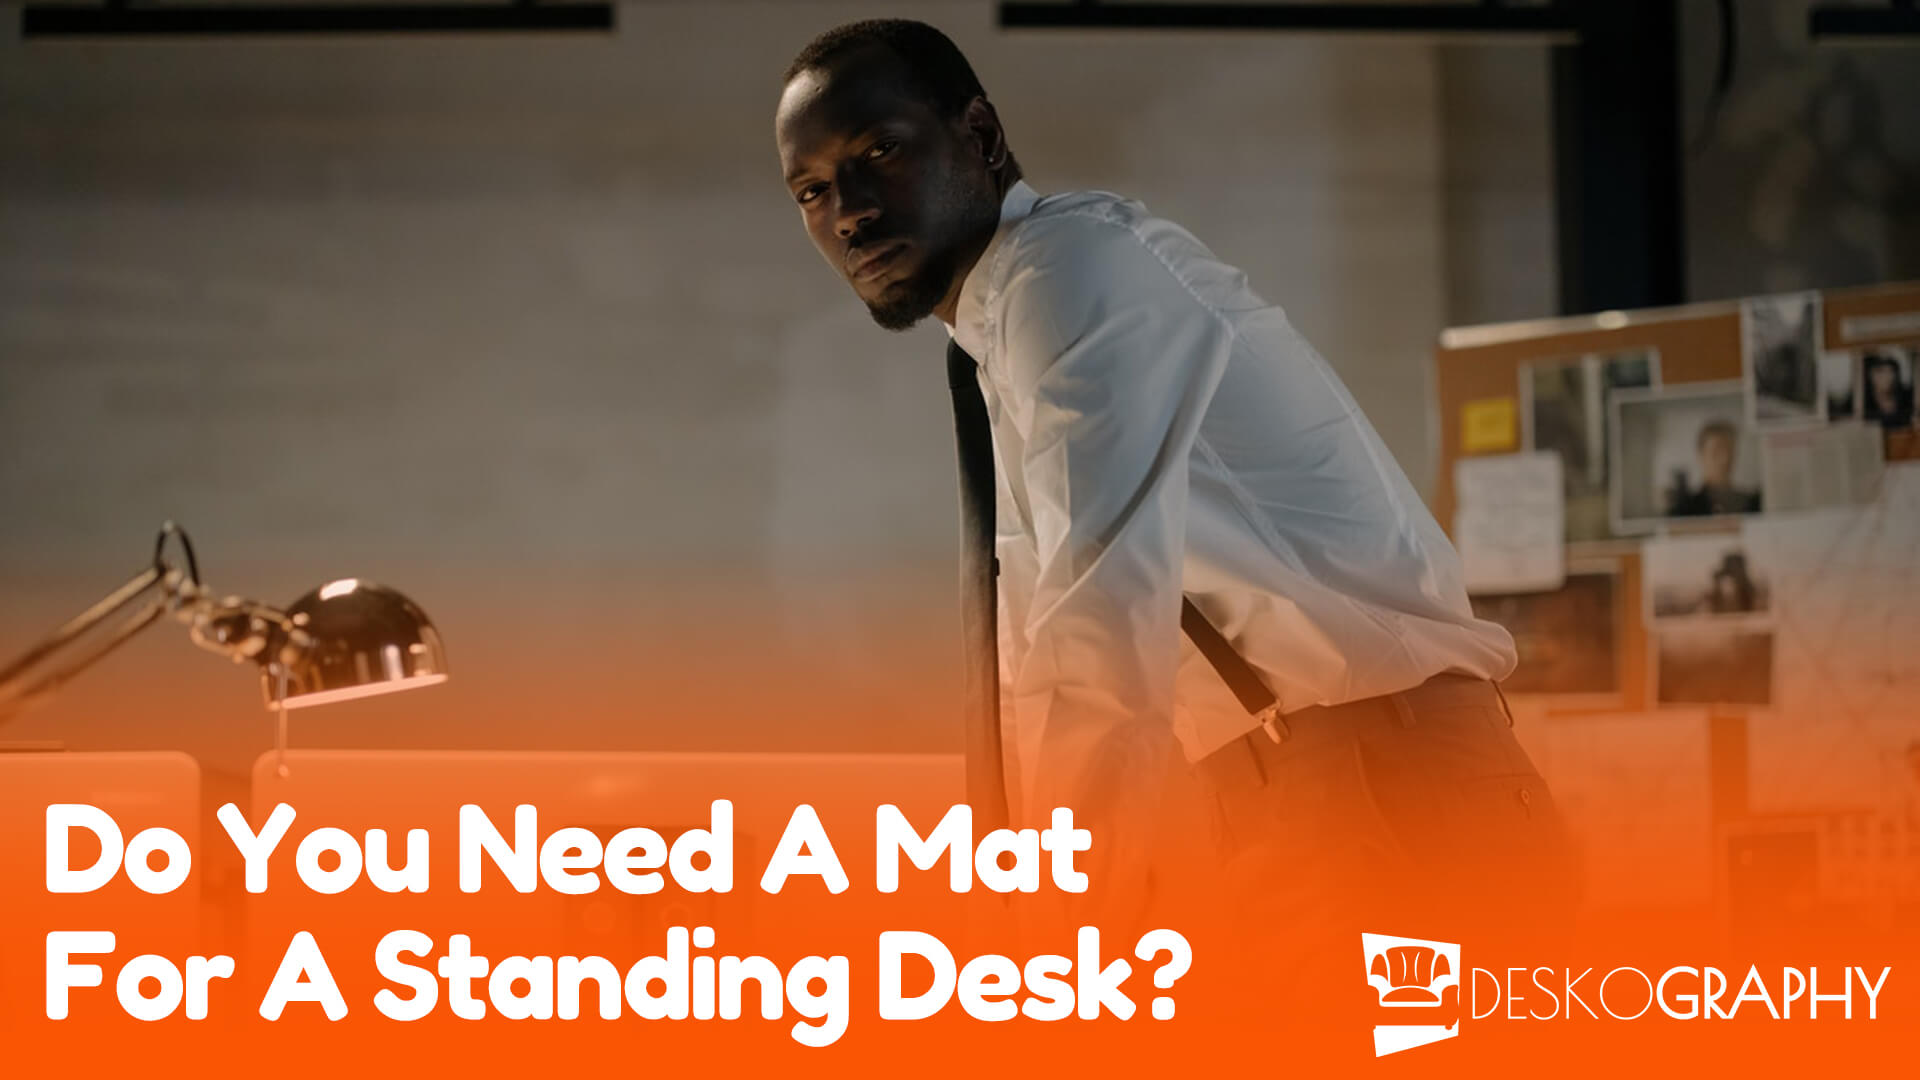 Do you need a mat for a standing desk